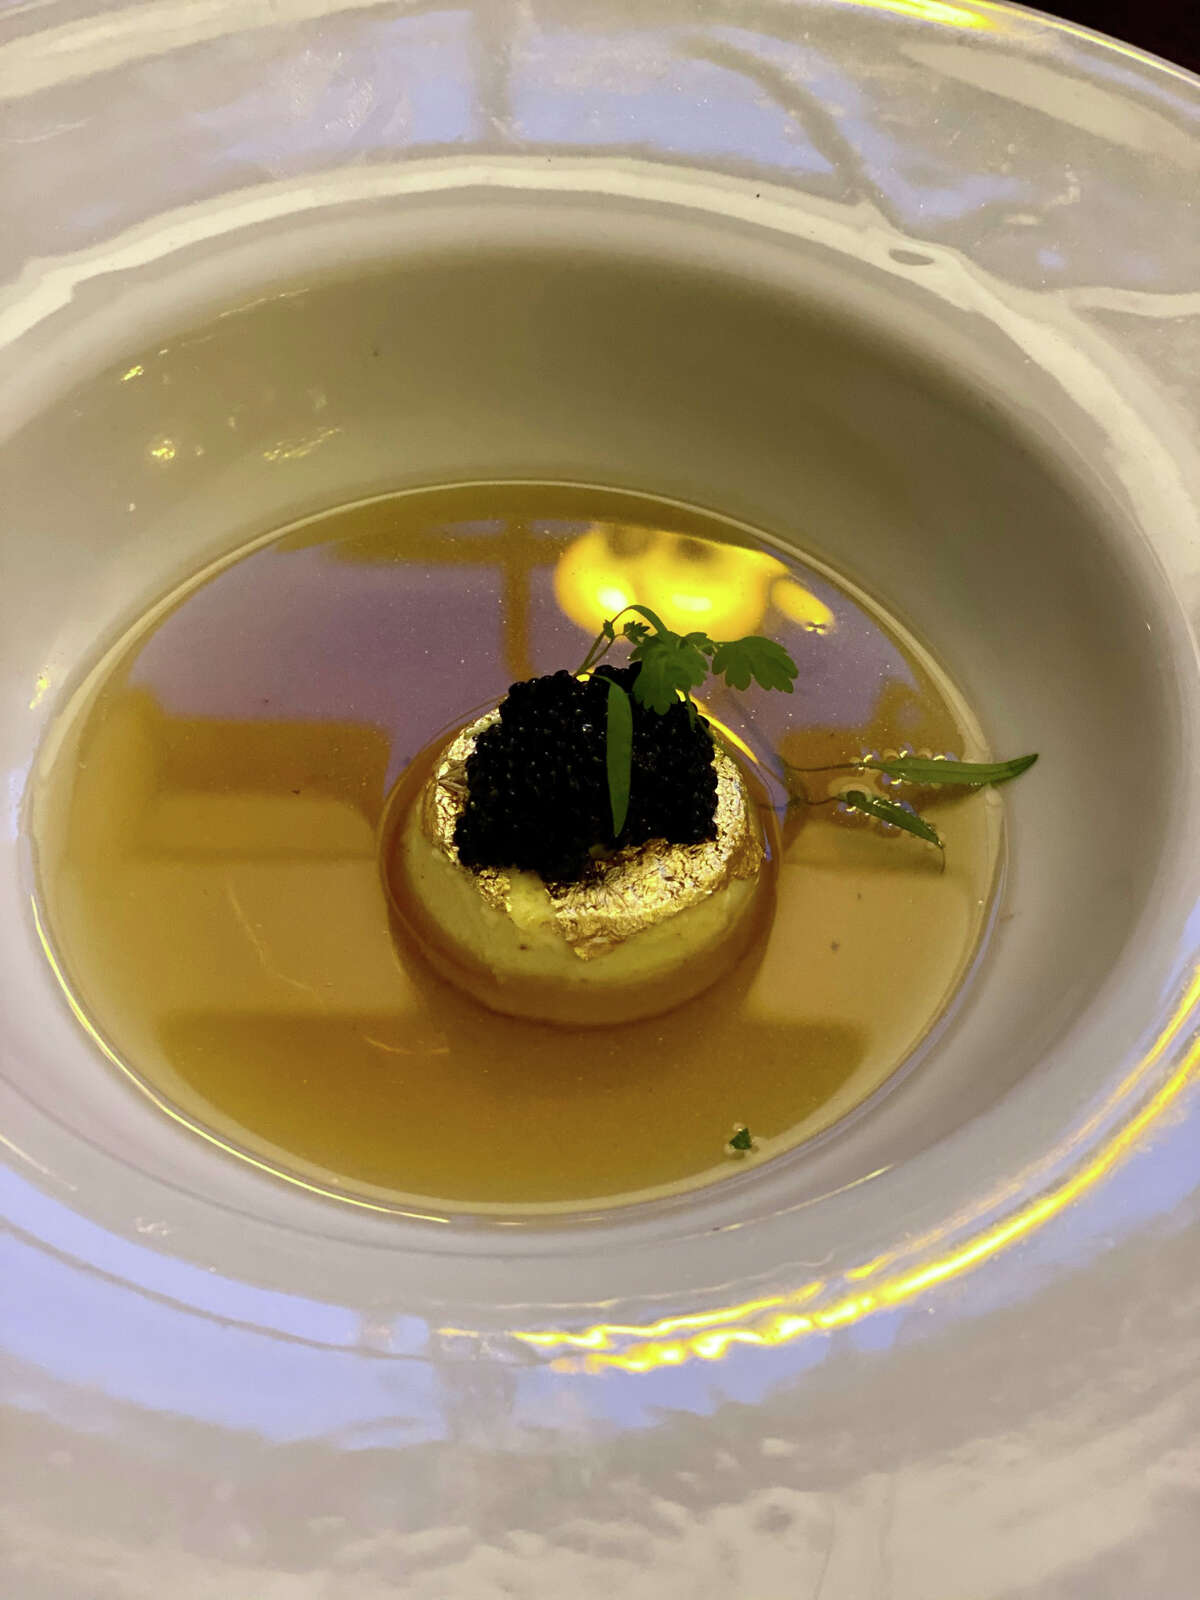 Edible gold foil wraps a savory custard that is topped with caviar and bathed in crystal-clear bison consommé at Jack's Oyster House in Albany.